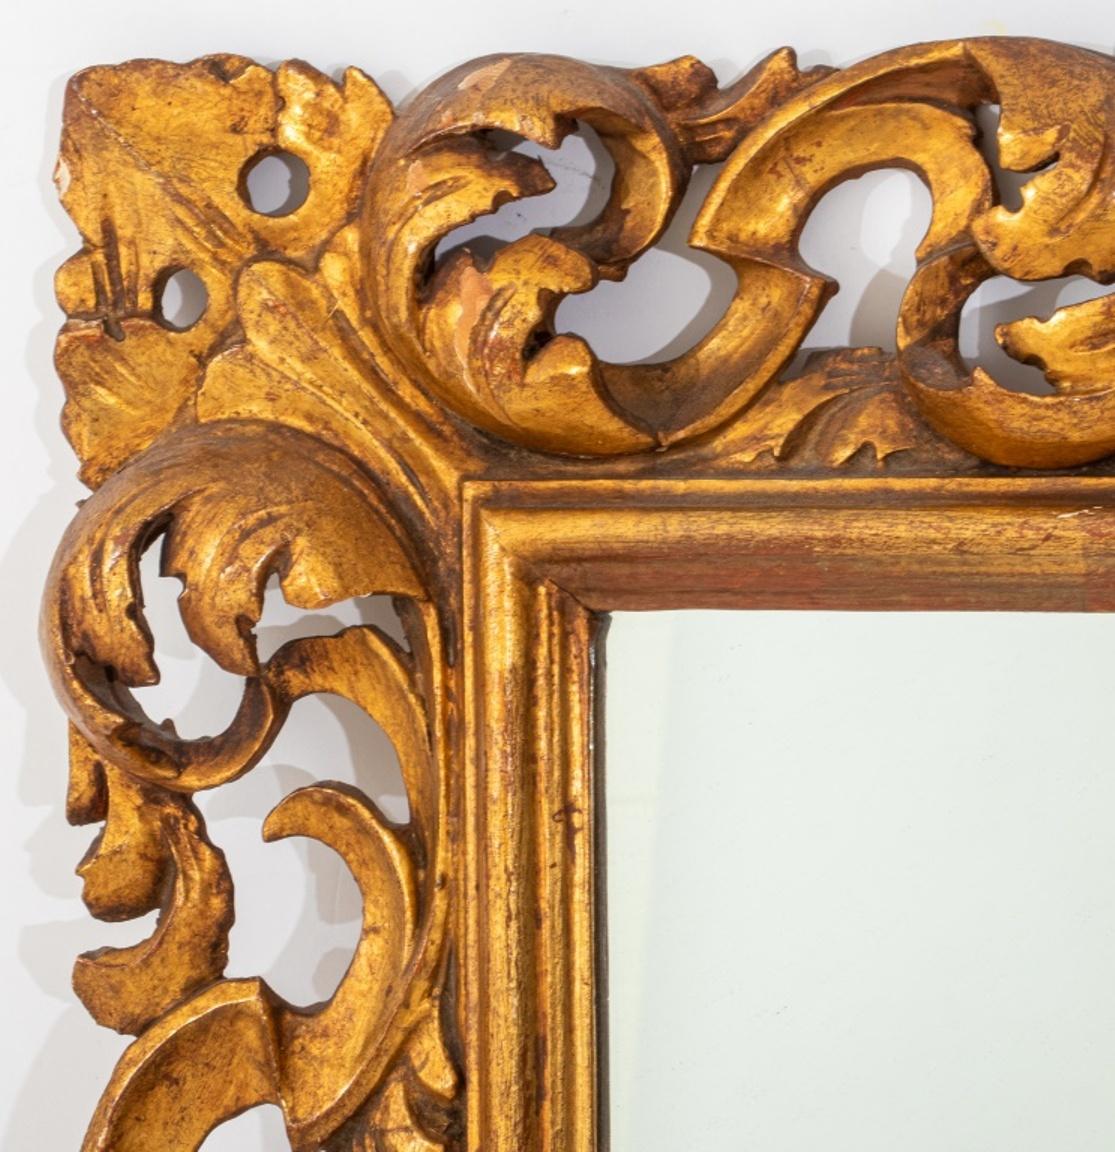 Italian Baroque style giltwood framed mirror, the scrolling foliate frame centering a mirror plate, B. Altman label on back. 

Dimensions: 32